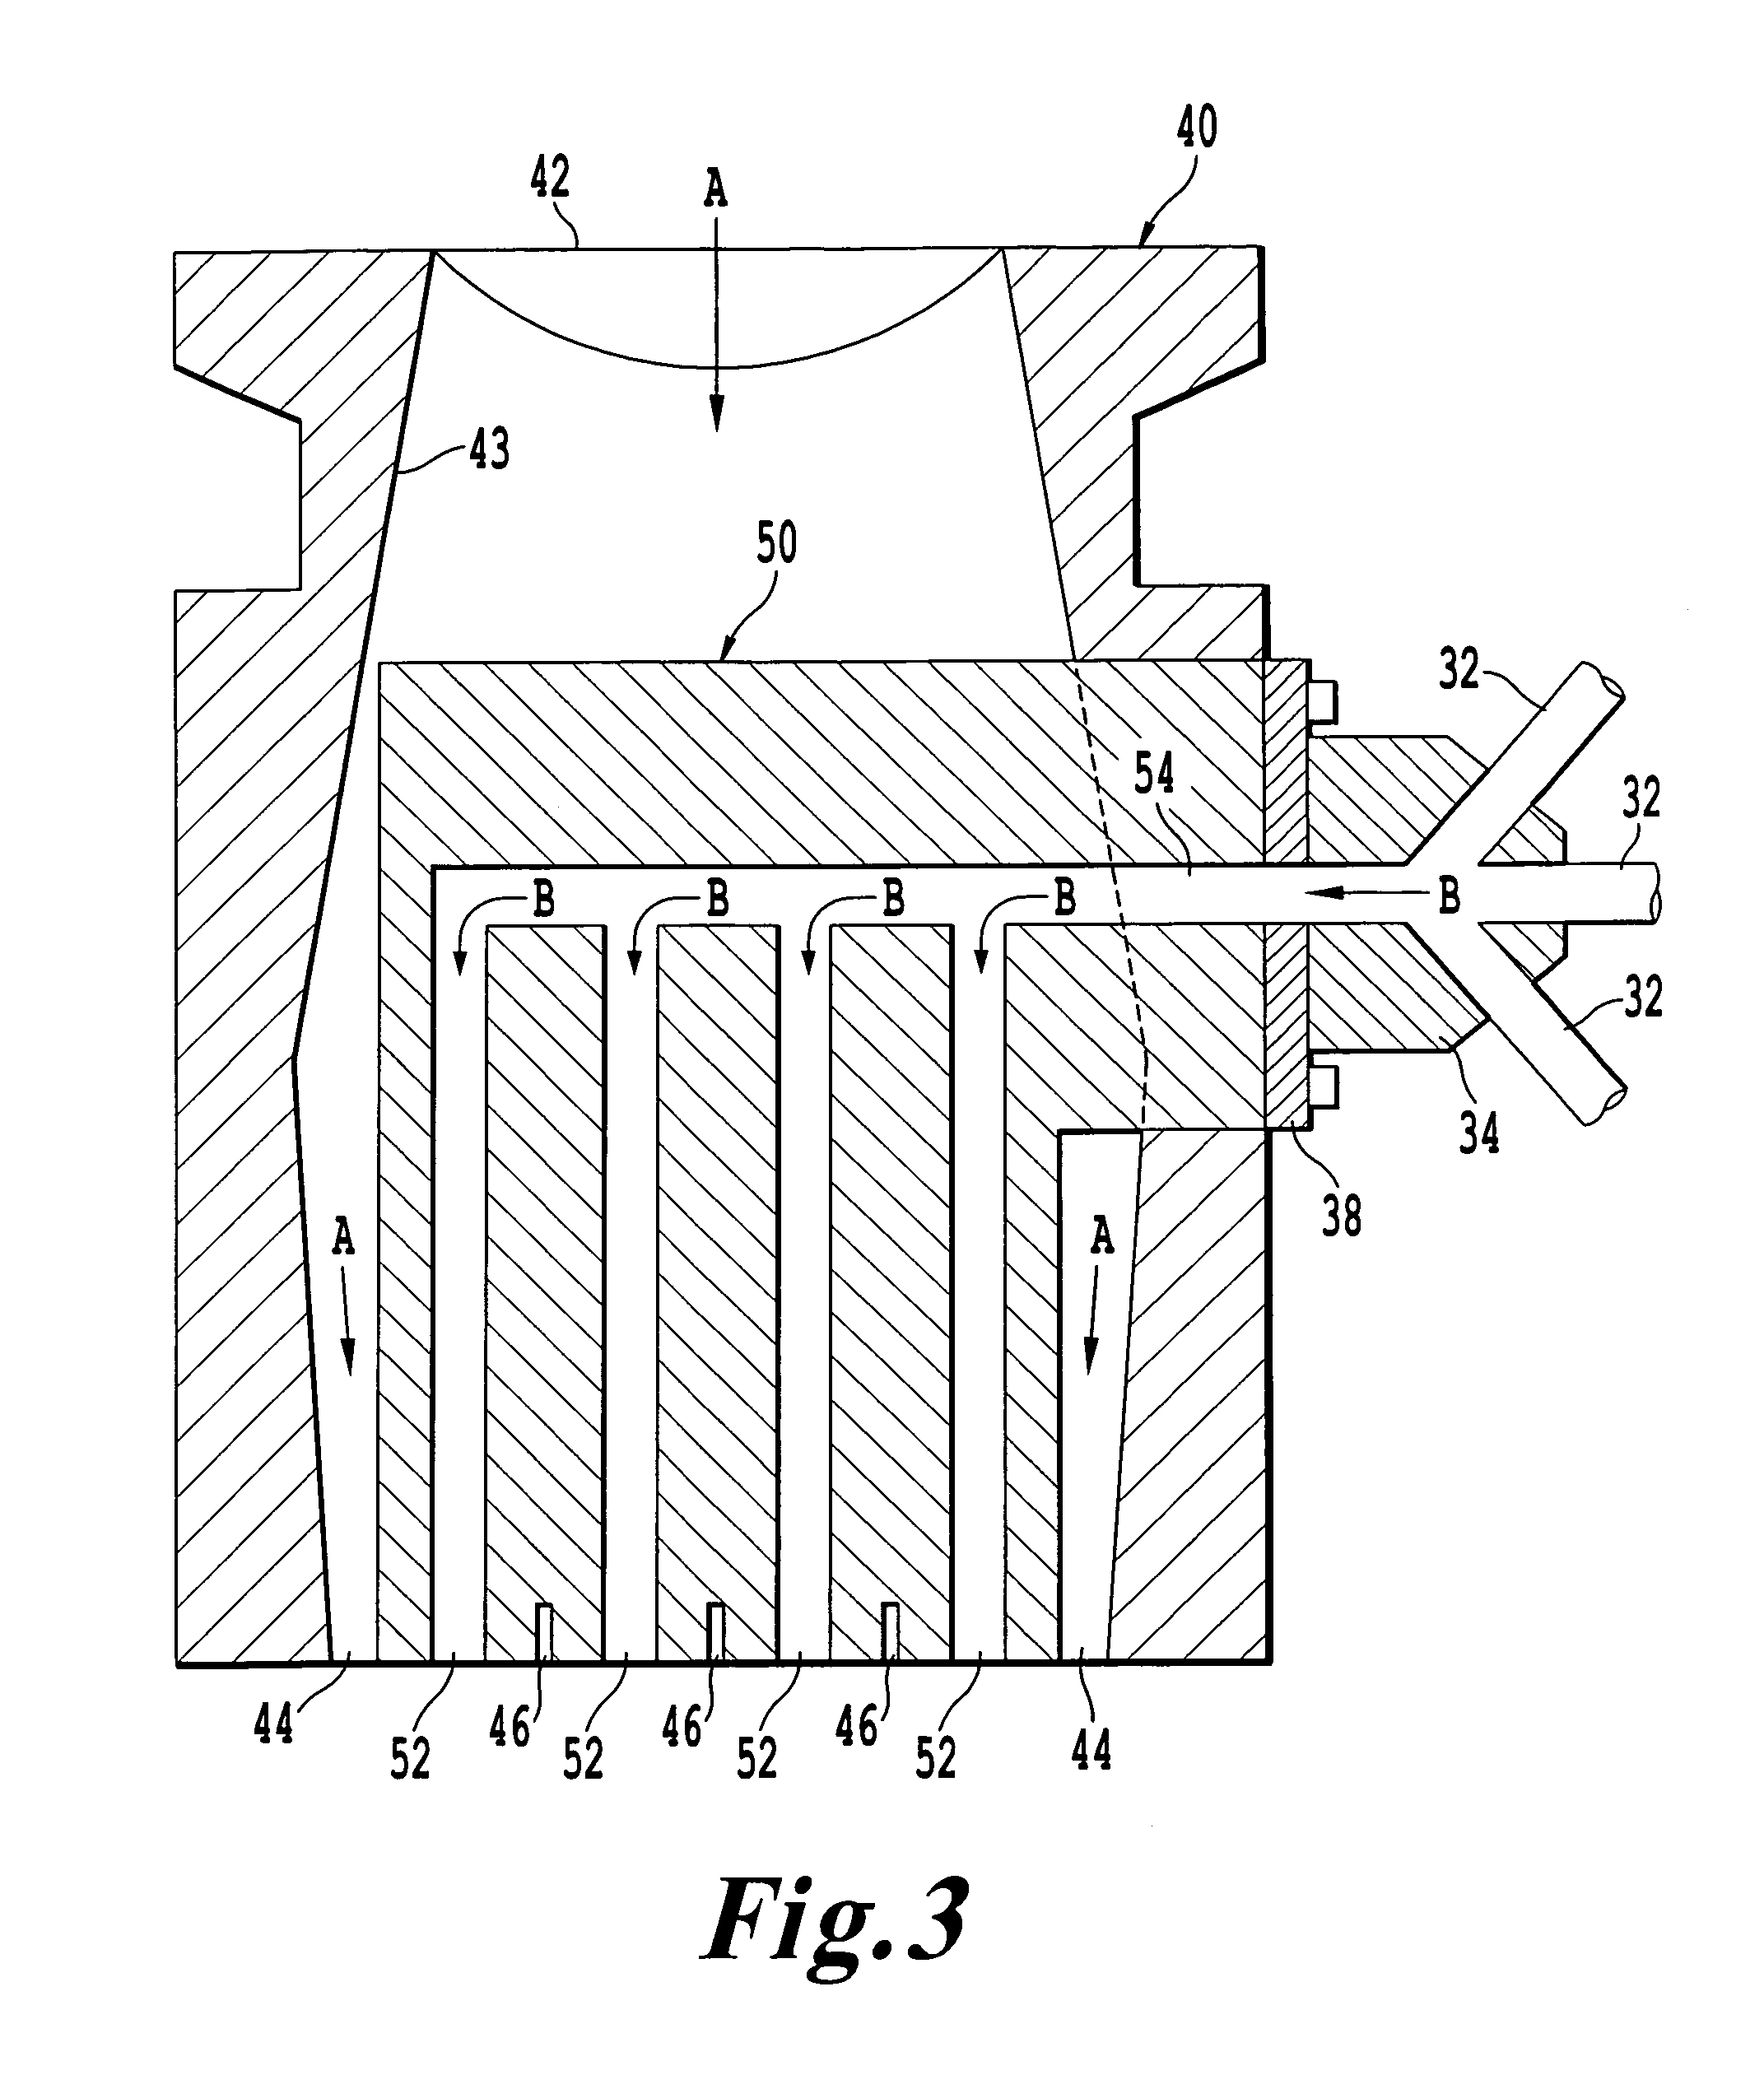 Extrusion/reaction injection molding system